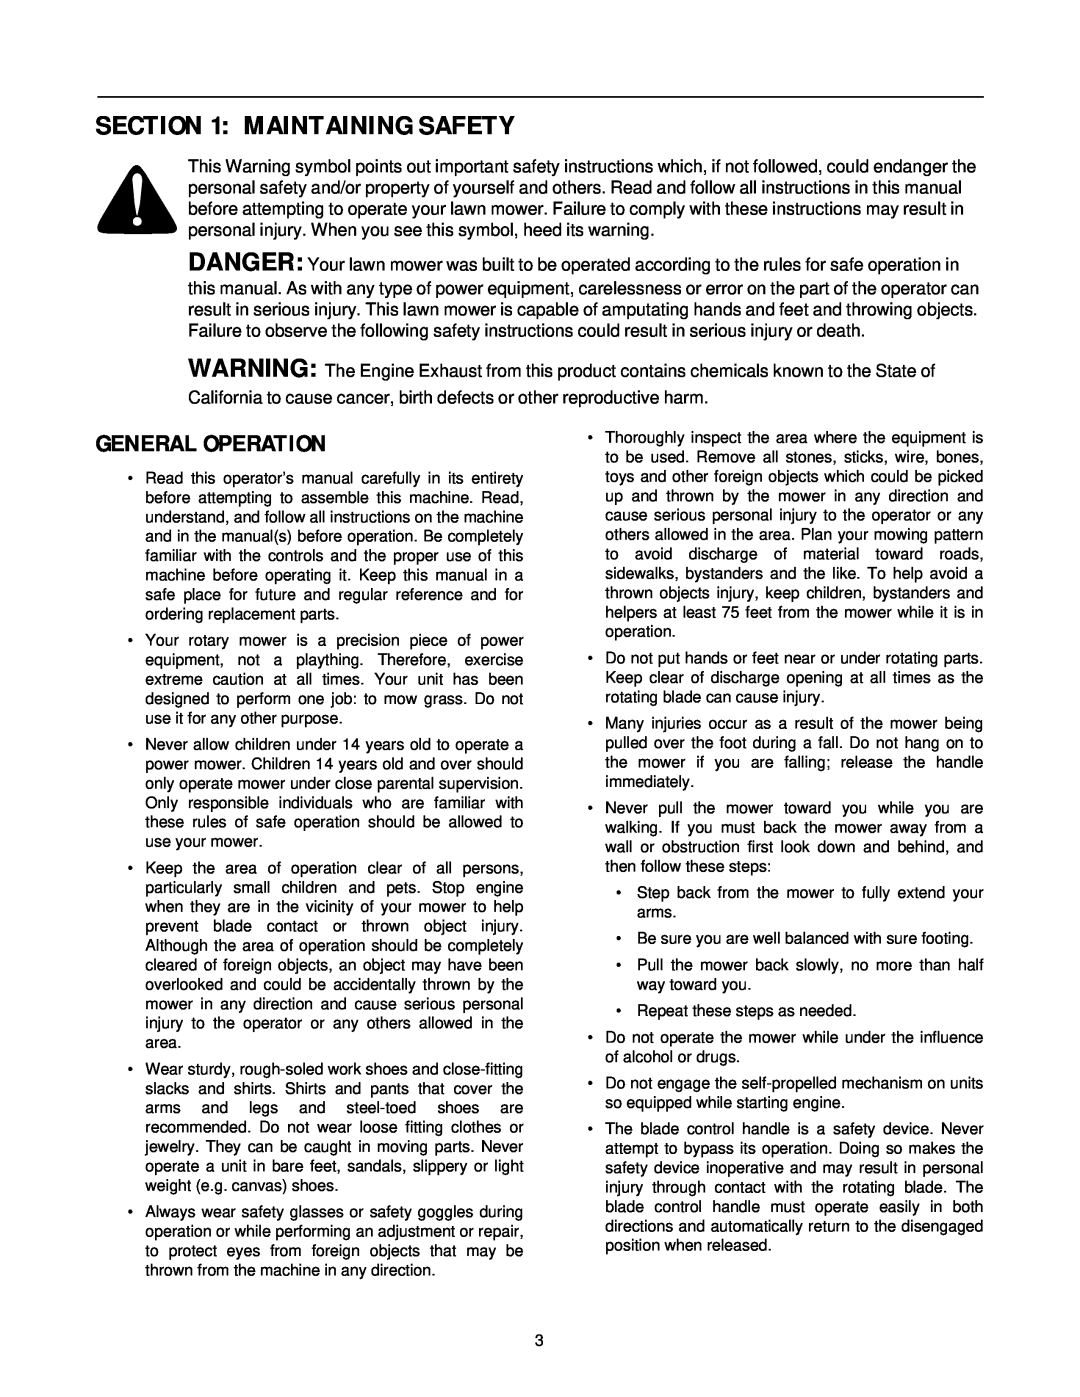 Yard-Man 11A-589C401 manual Maintaining Safety, General Operation 